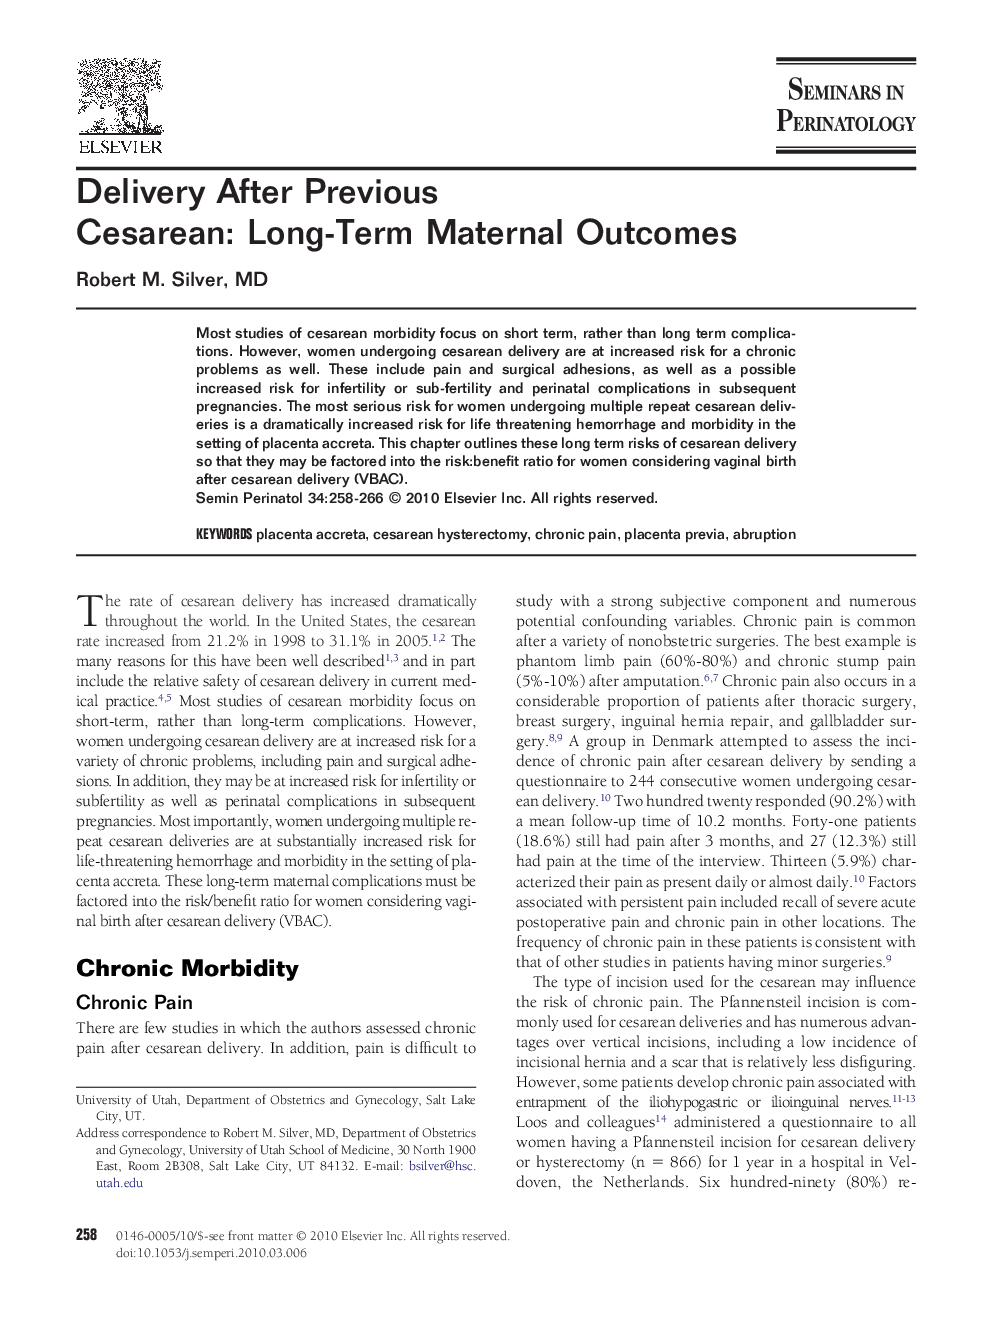 Delivery After Previous Cesarean: Long-Term Maternal Outcomes